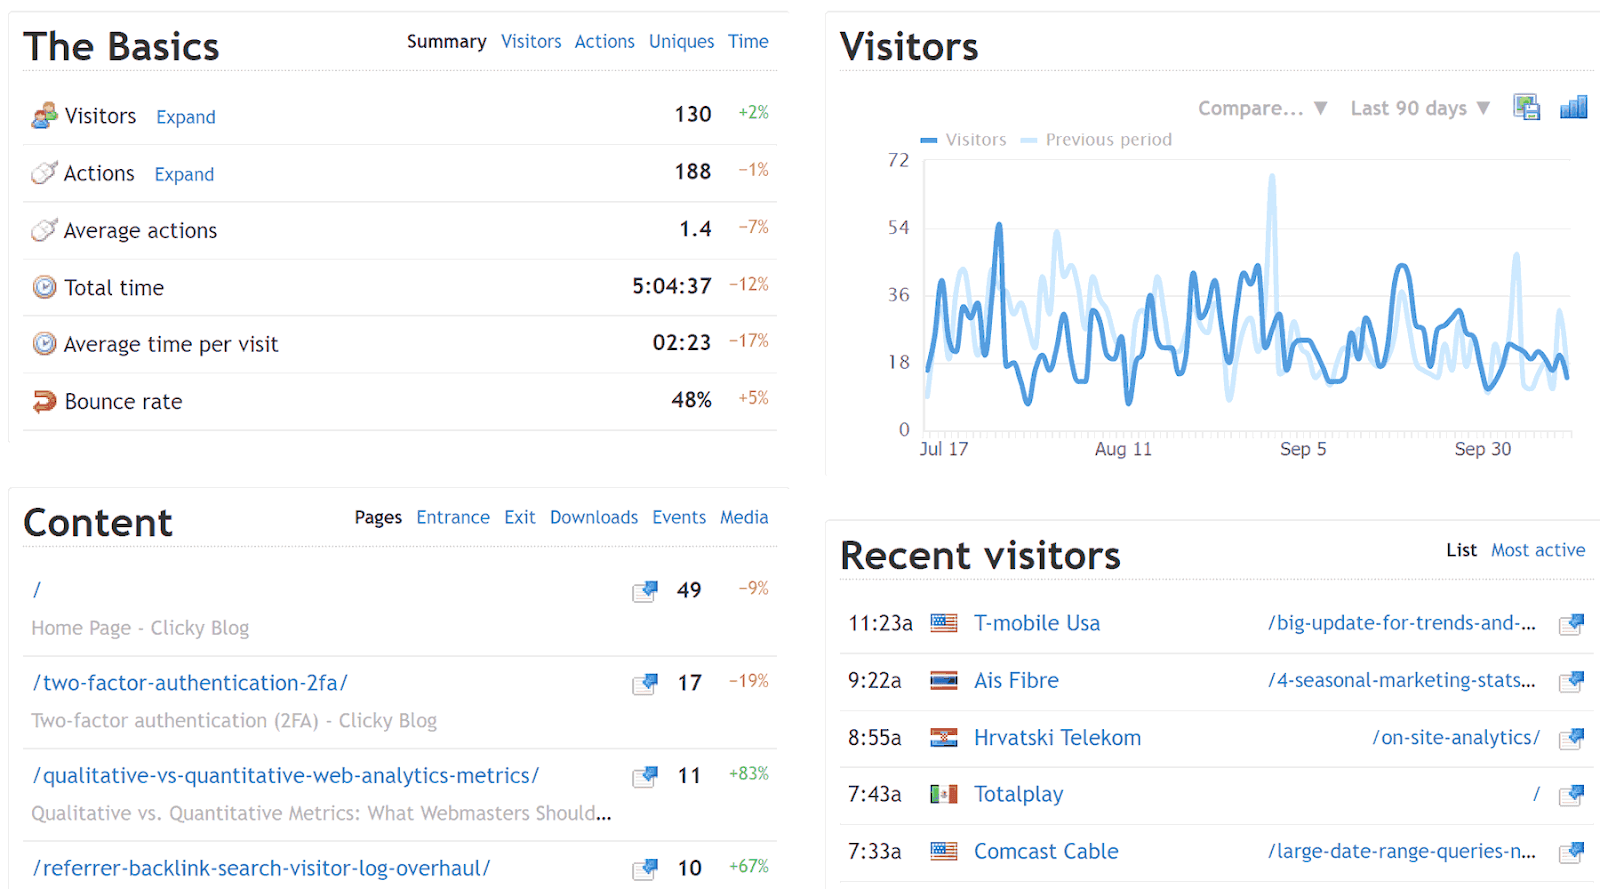 Clicky website showing "The Basics", "Visitors", "Content" and "Recent Visitors" metrics